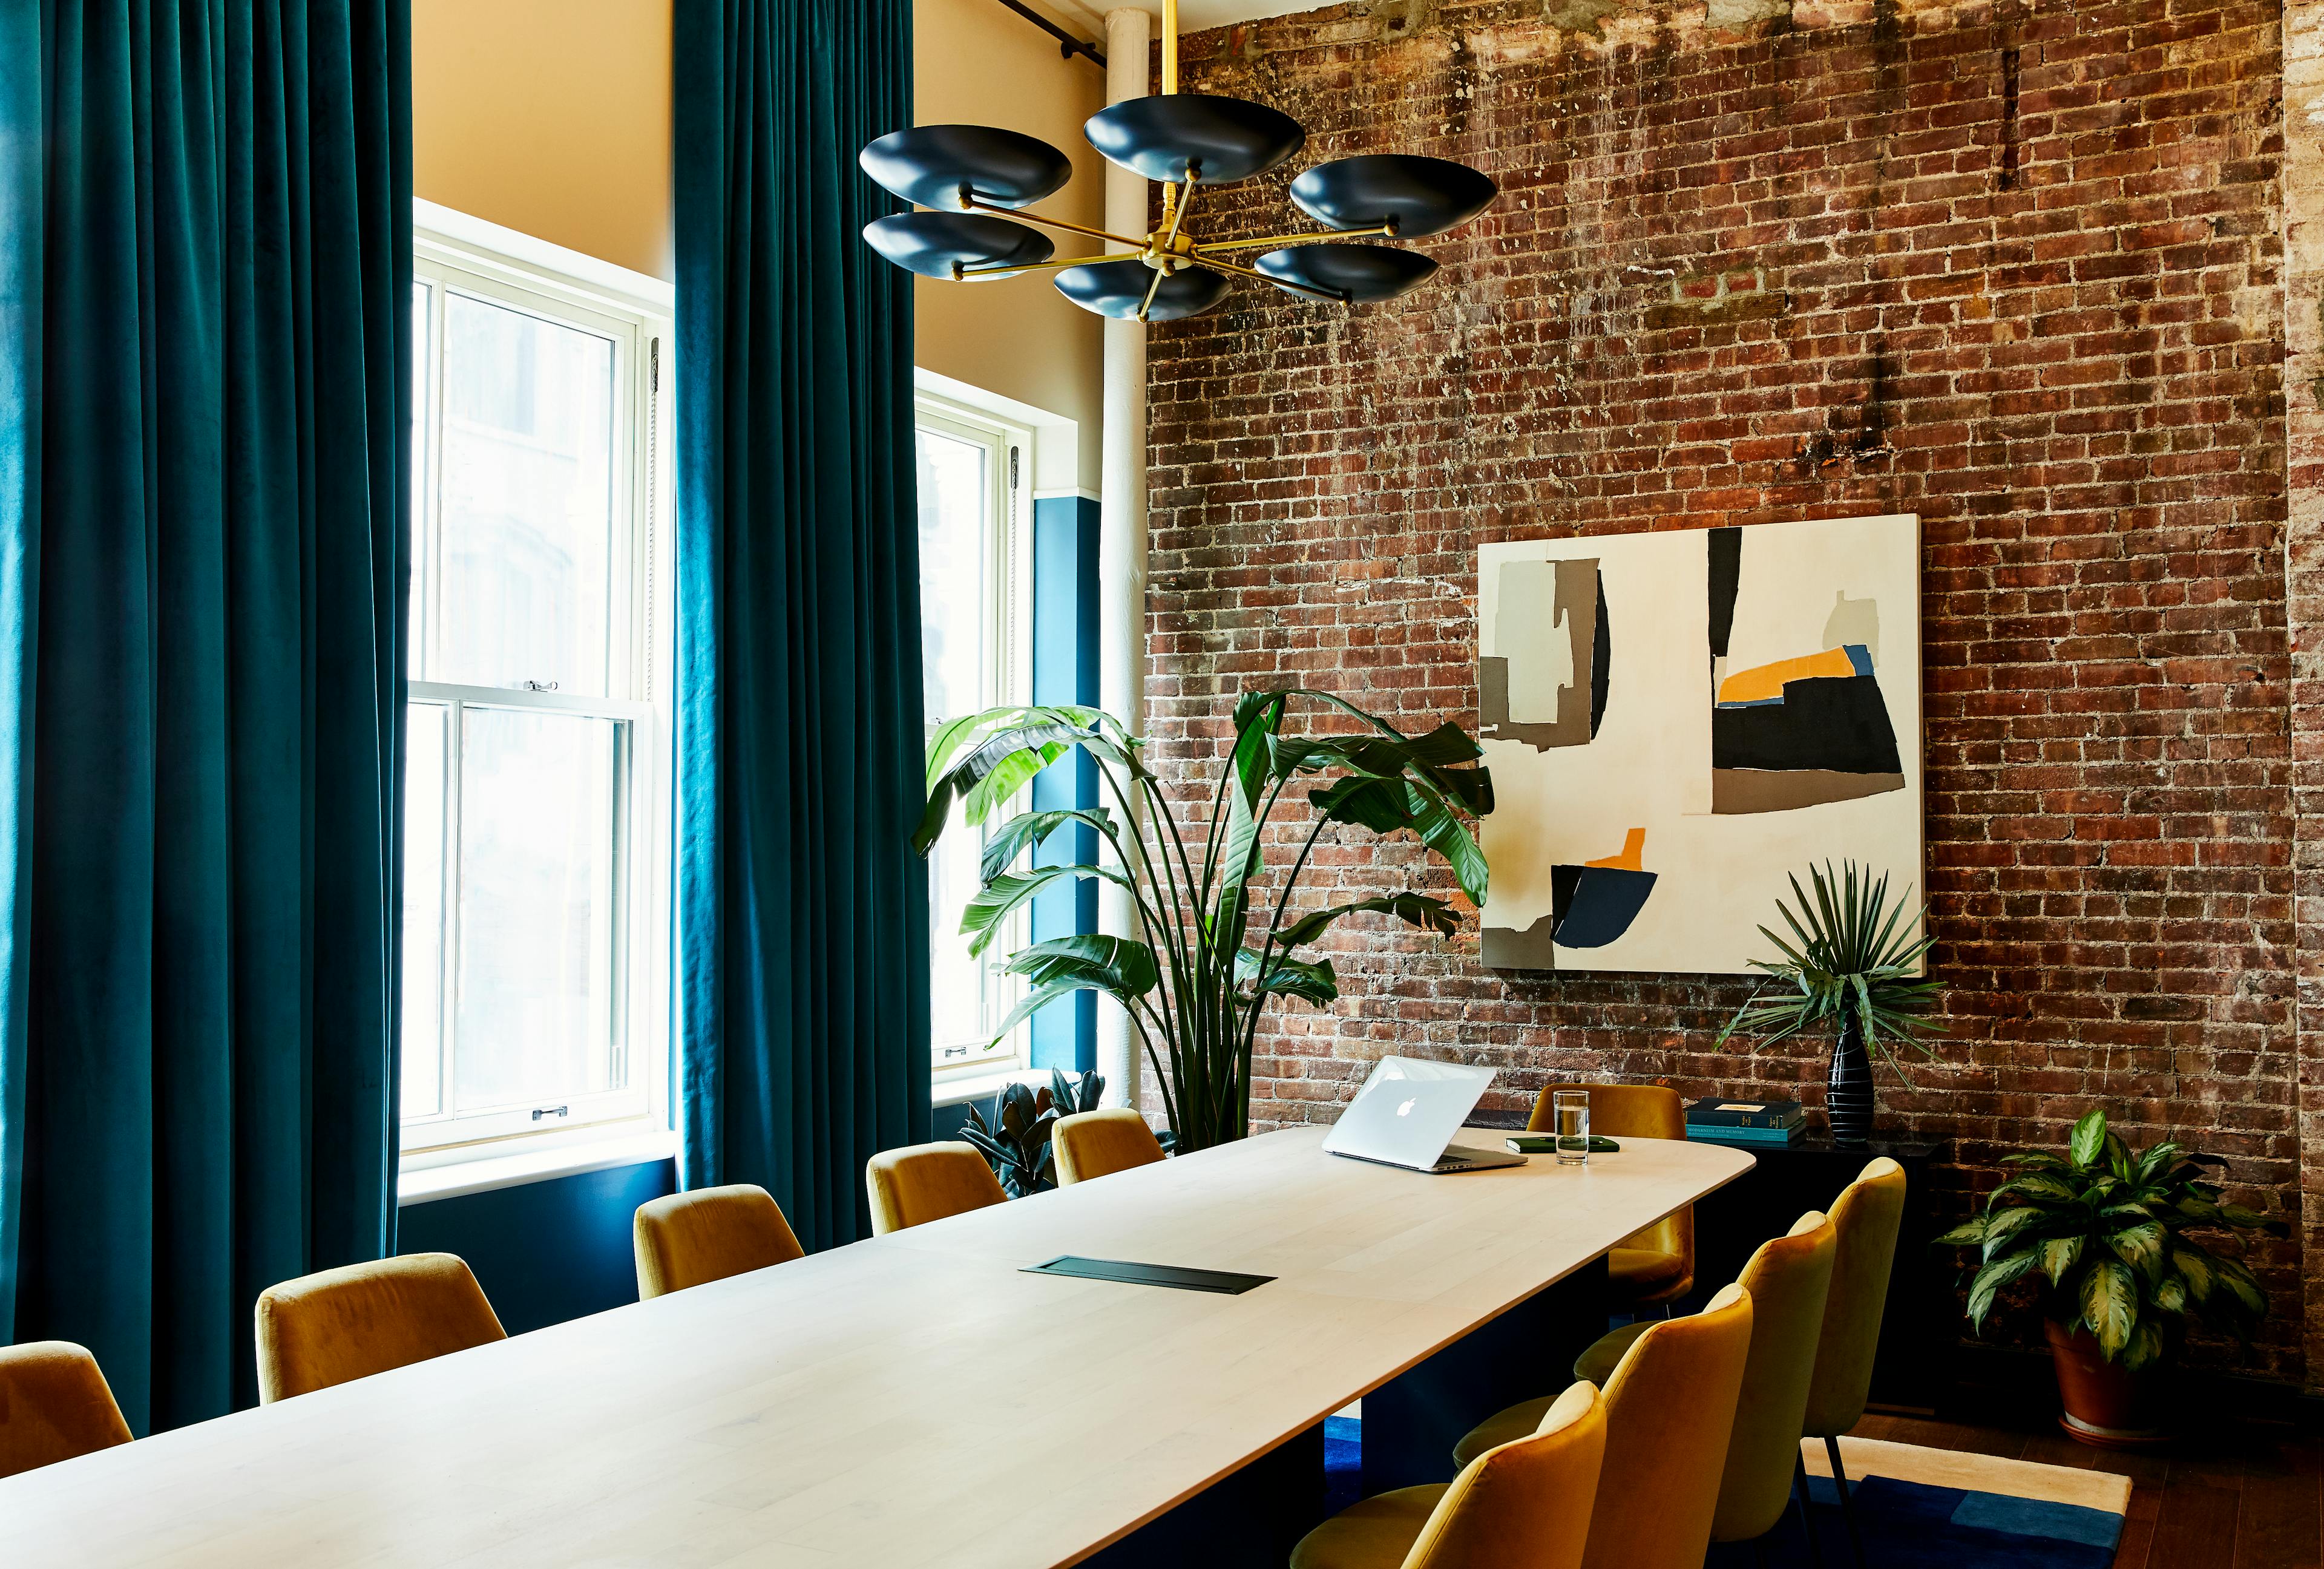 A boardroom at the Chief Flatiron Clubhouse, featuring a long wooden table and an abstract painting by artist Holly Addi installed on a brick wall.